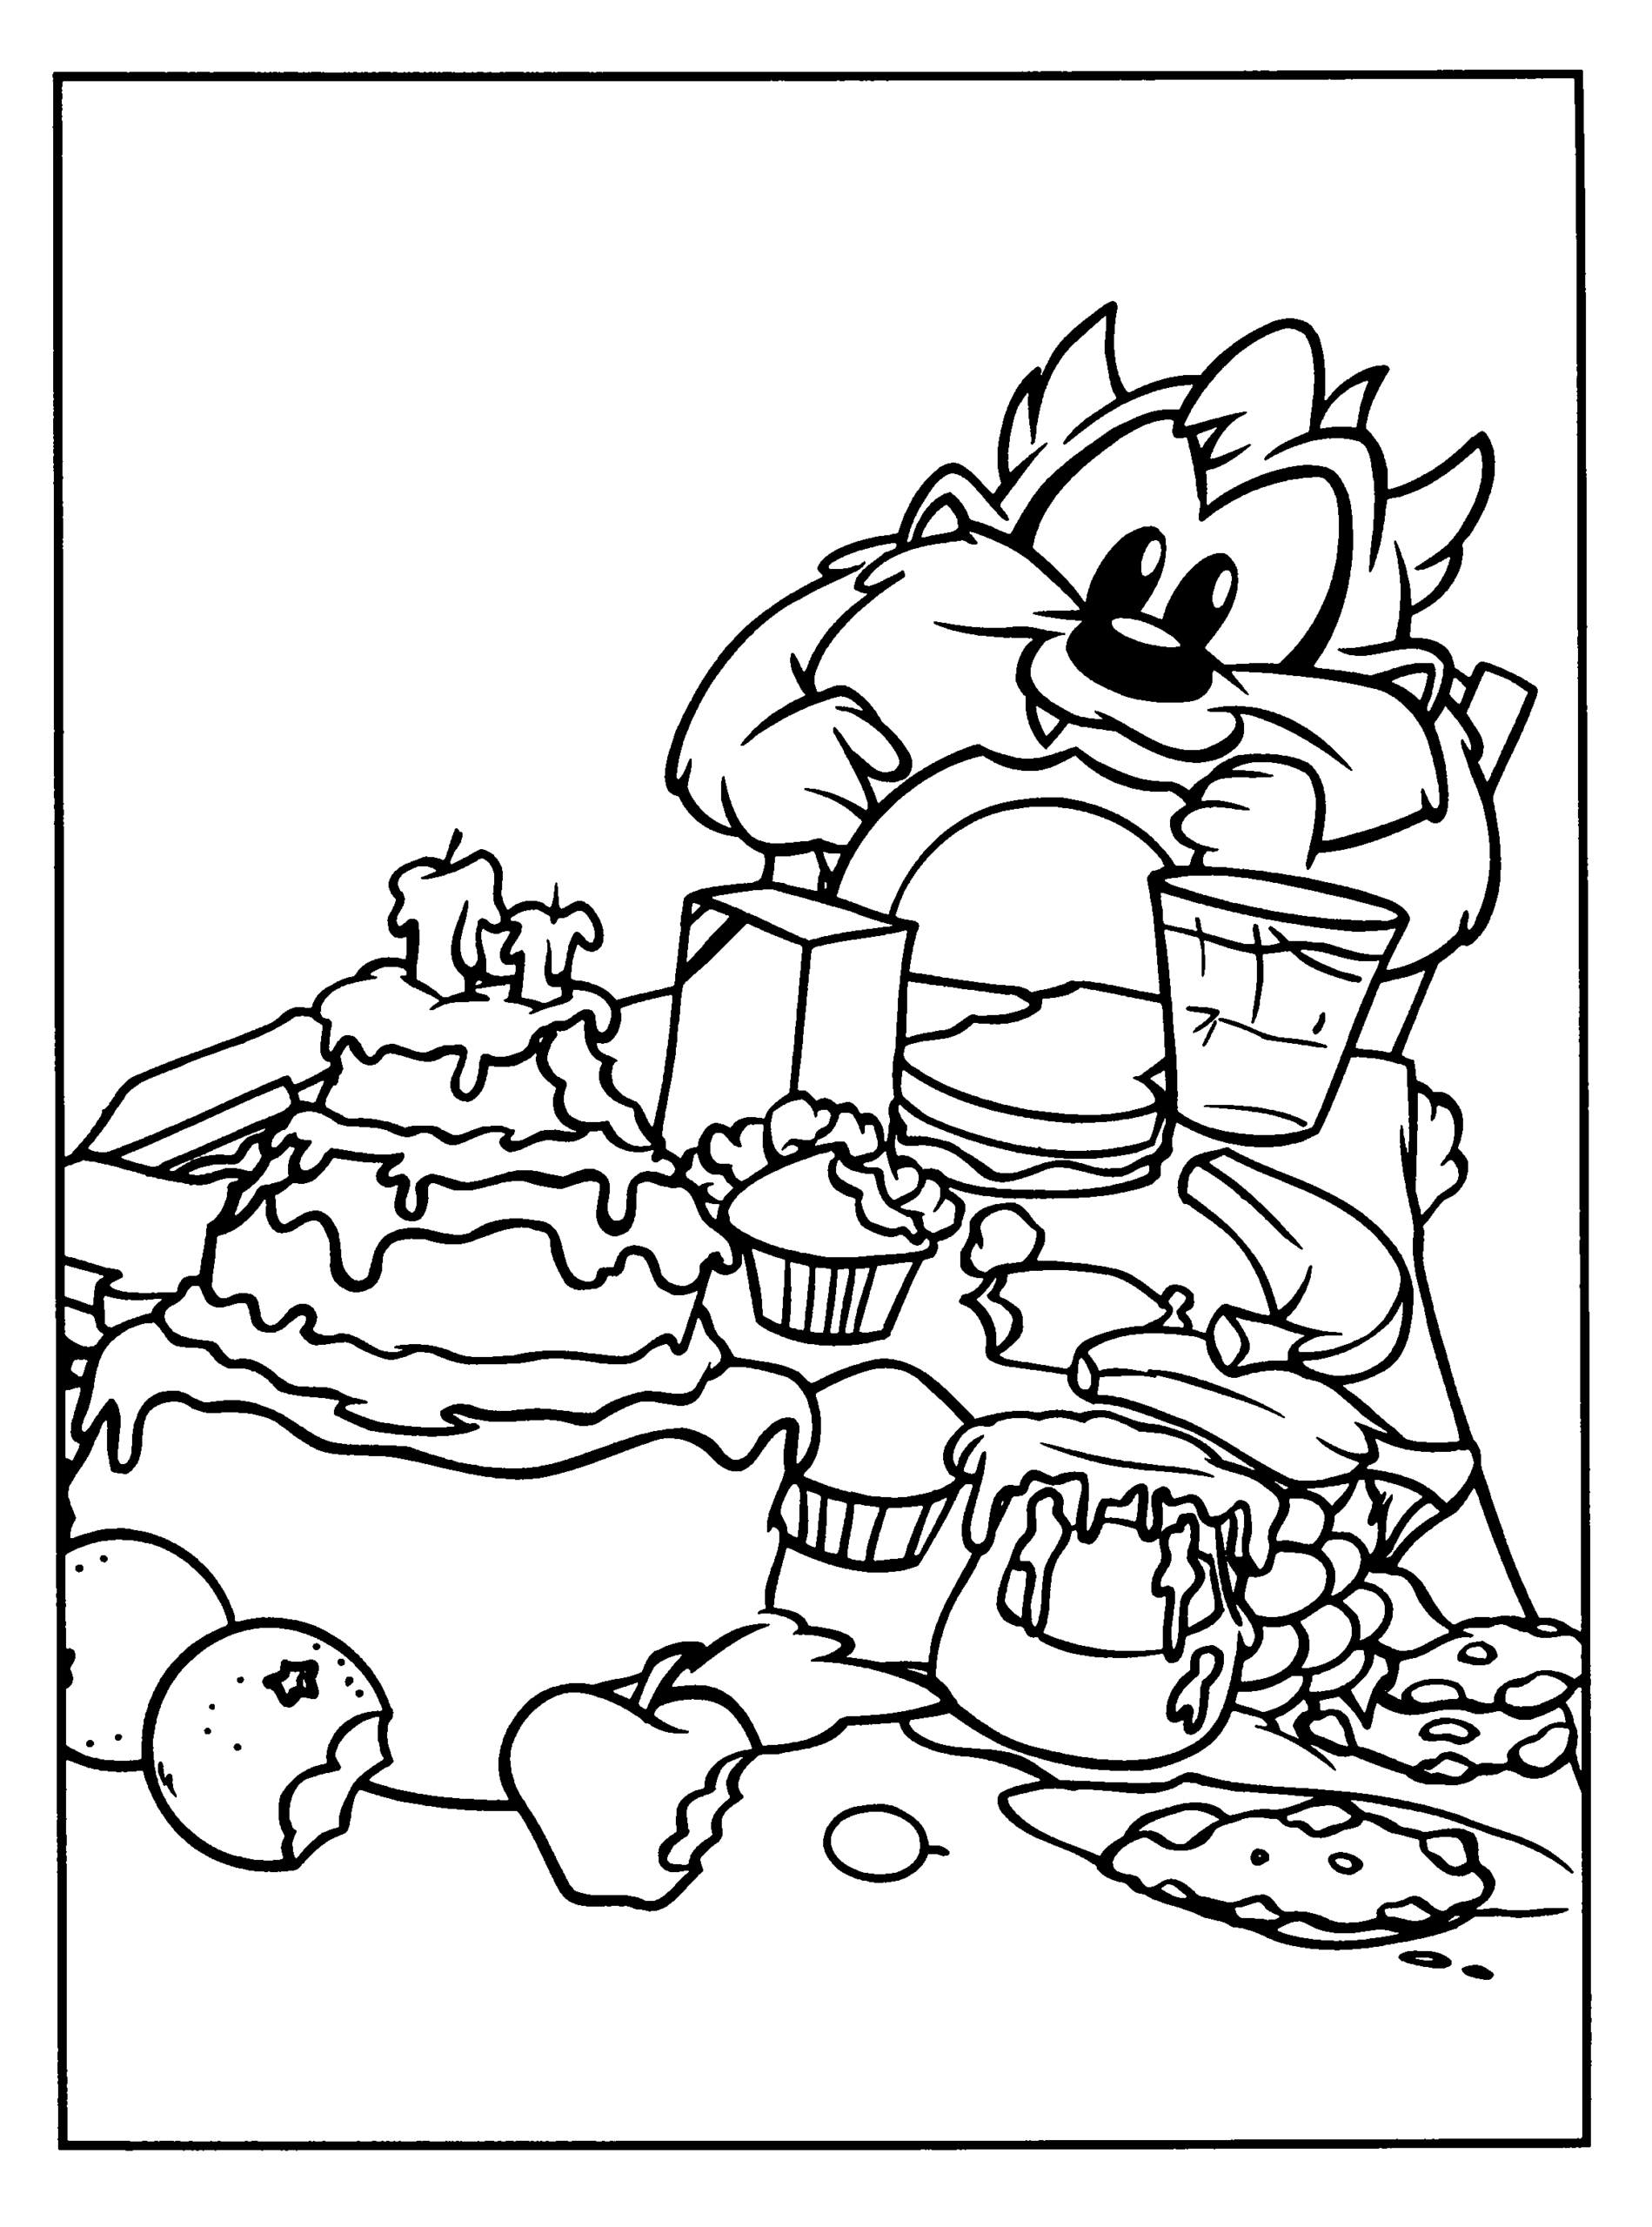 Looney Tunes Coloring Pages TV Film looney tunes 3 Printable 2020 04592 Coloring4free